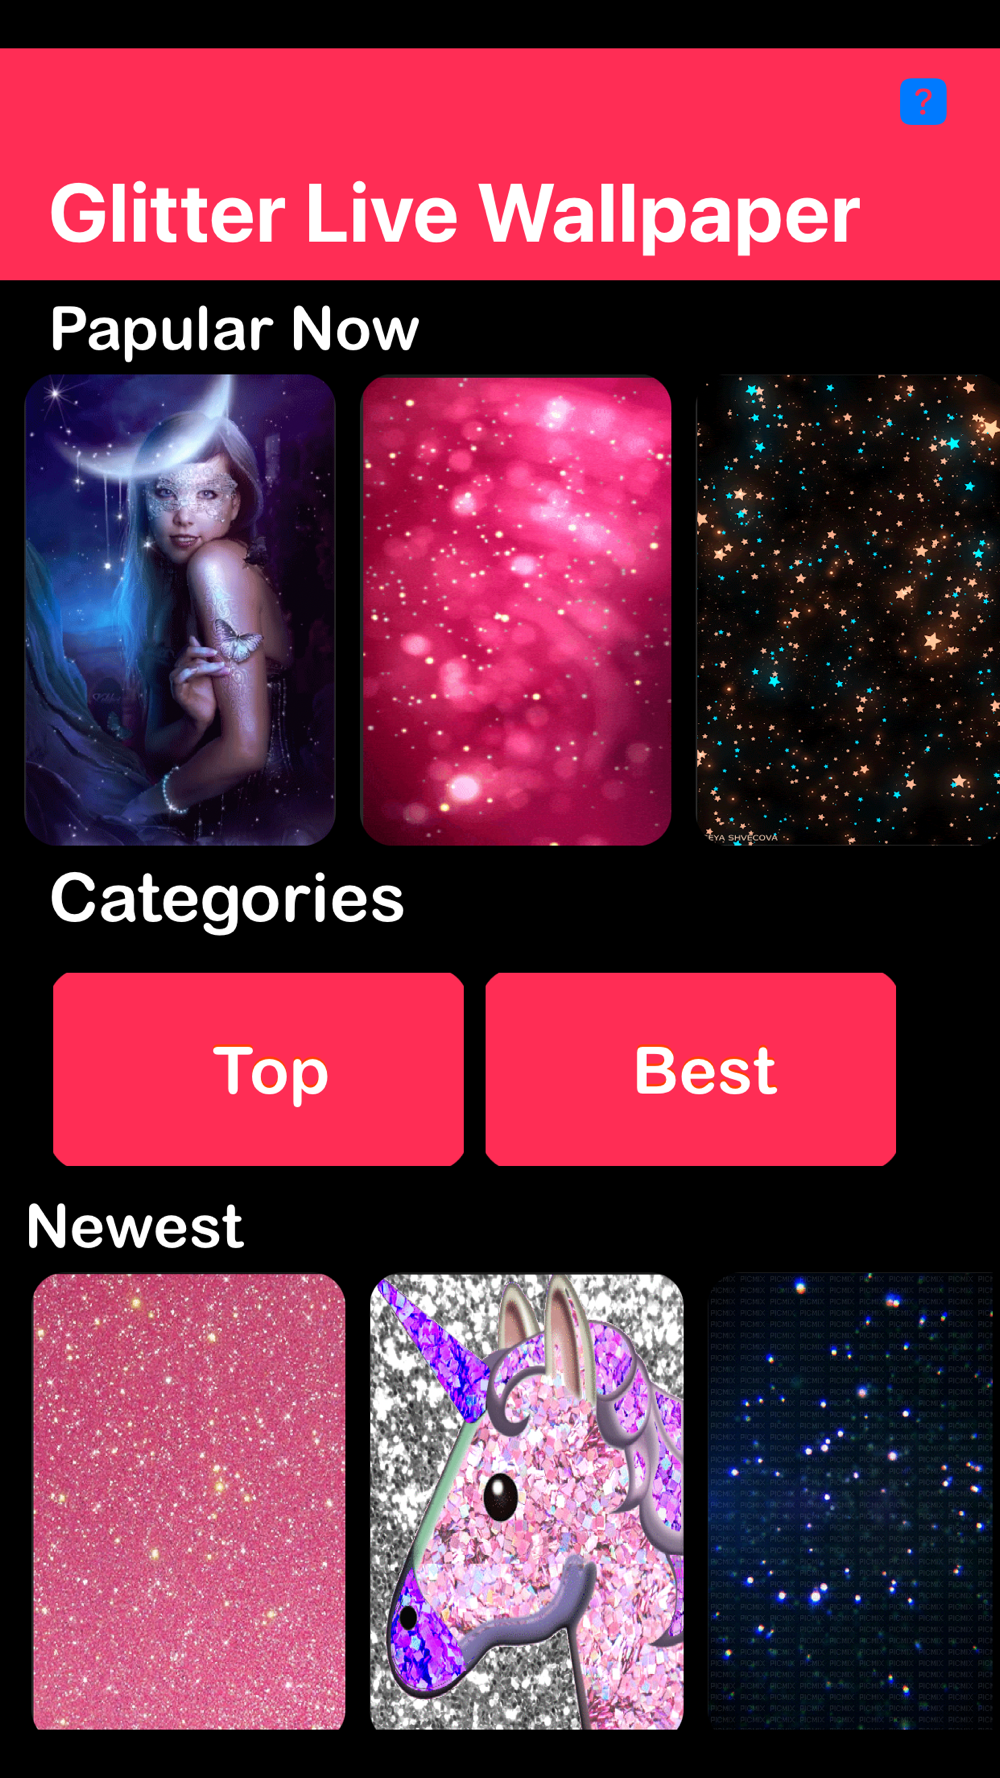 Pink Glitter live Wallpaper Free Download App for iPhone 